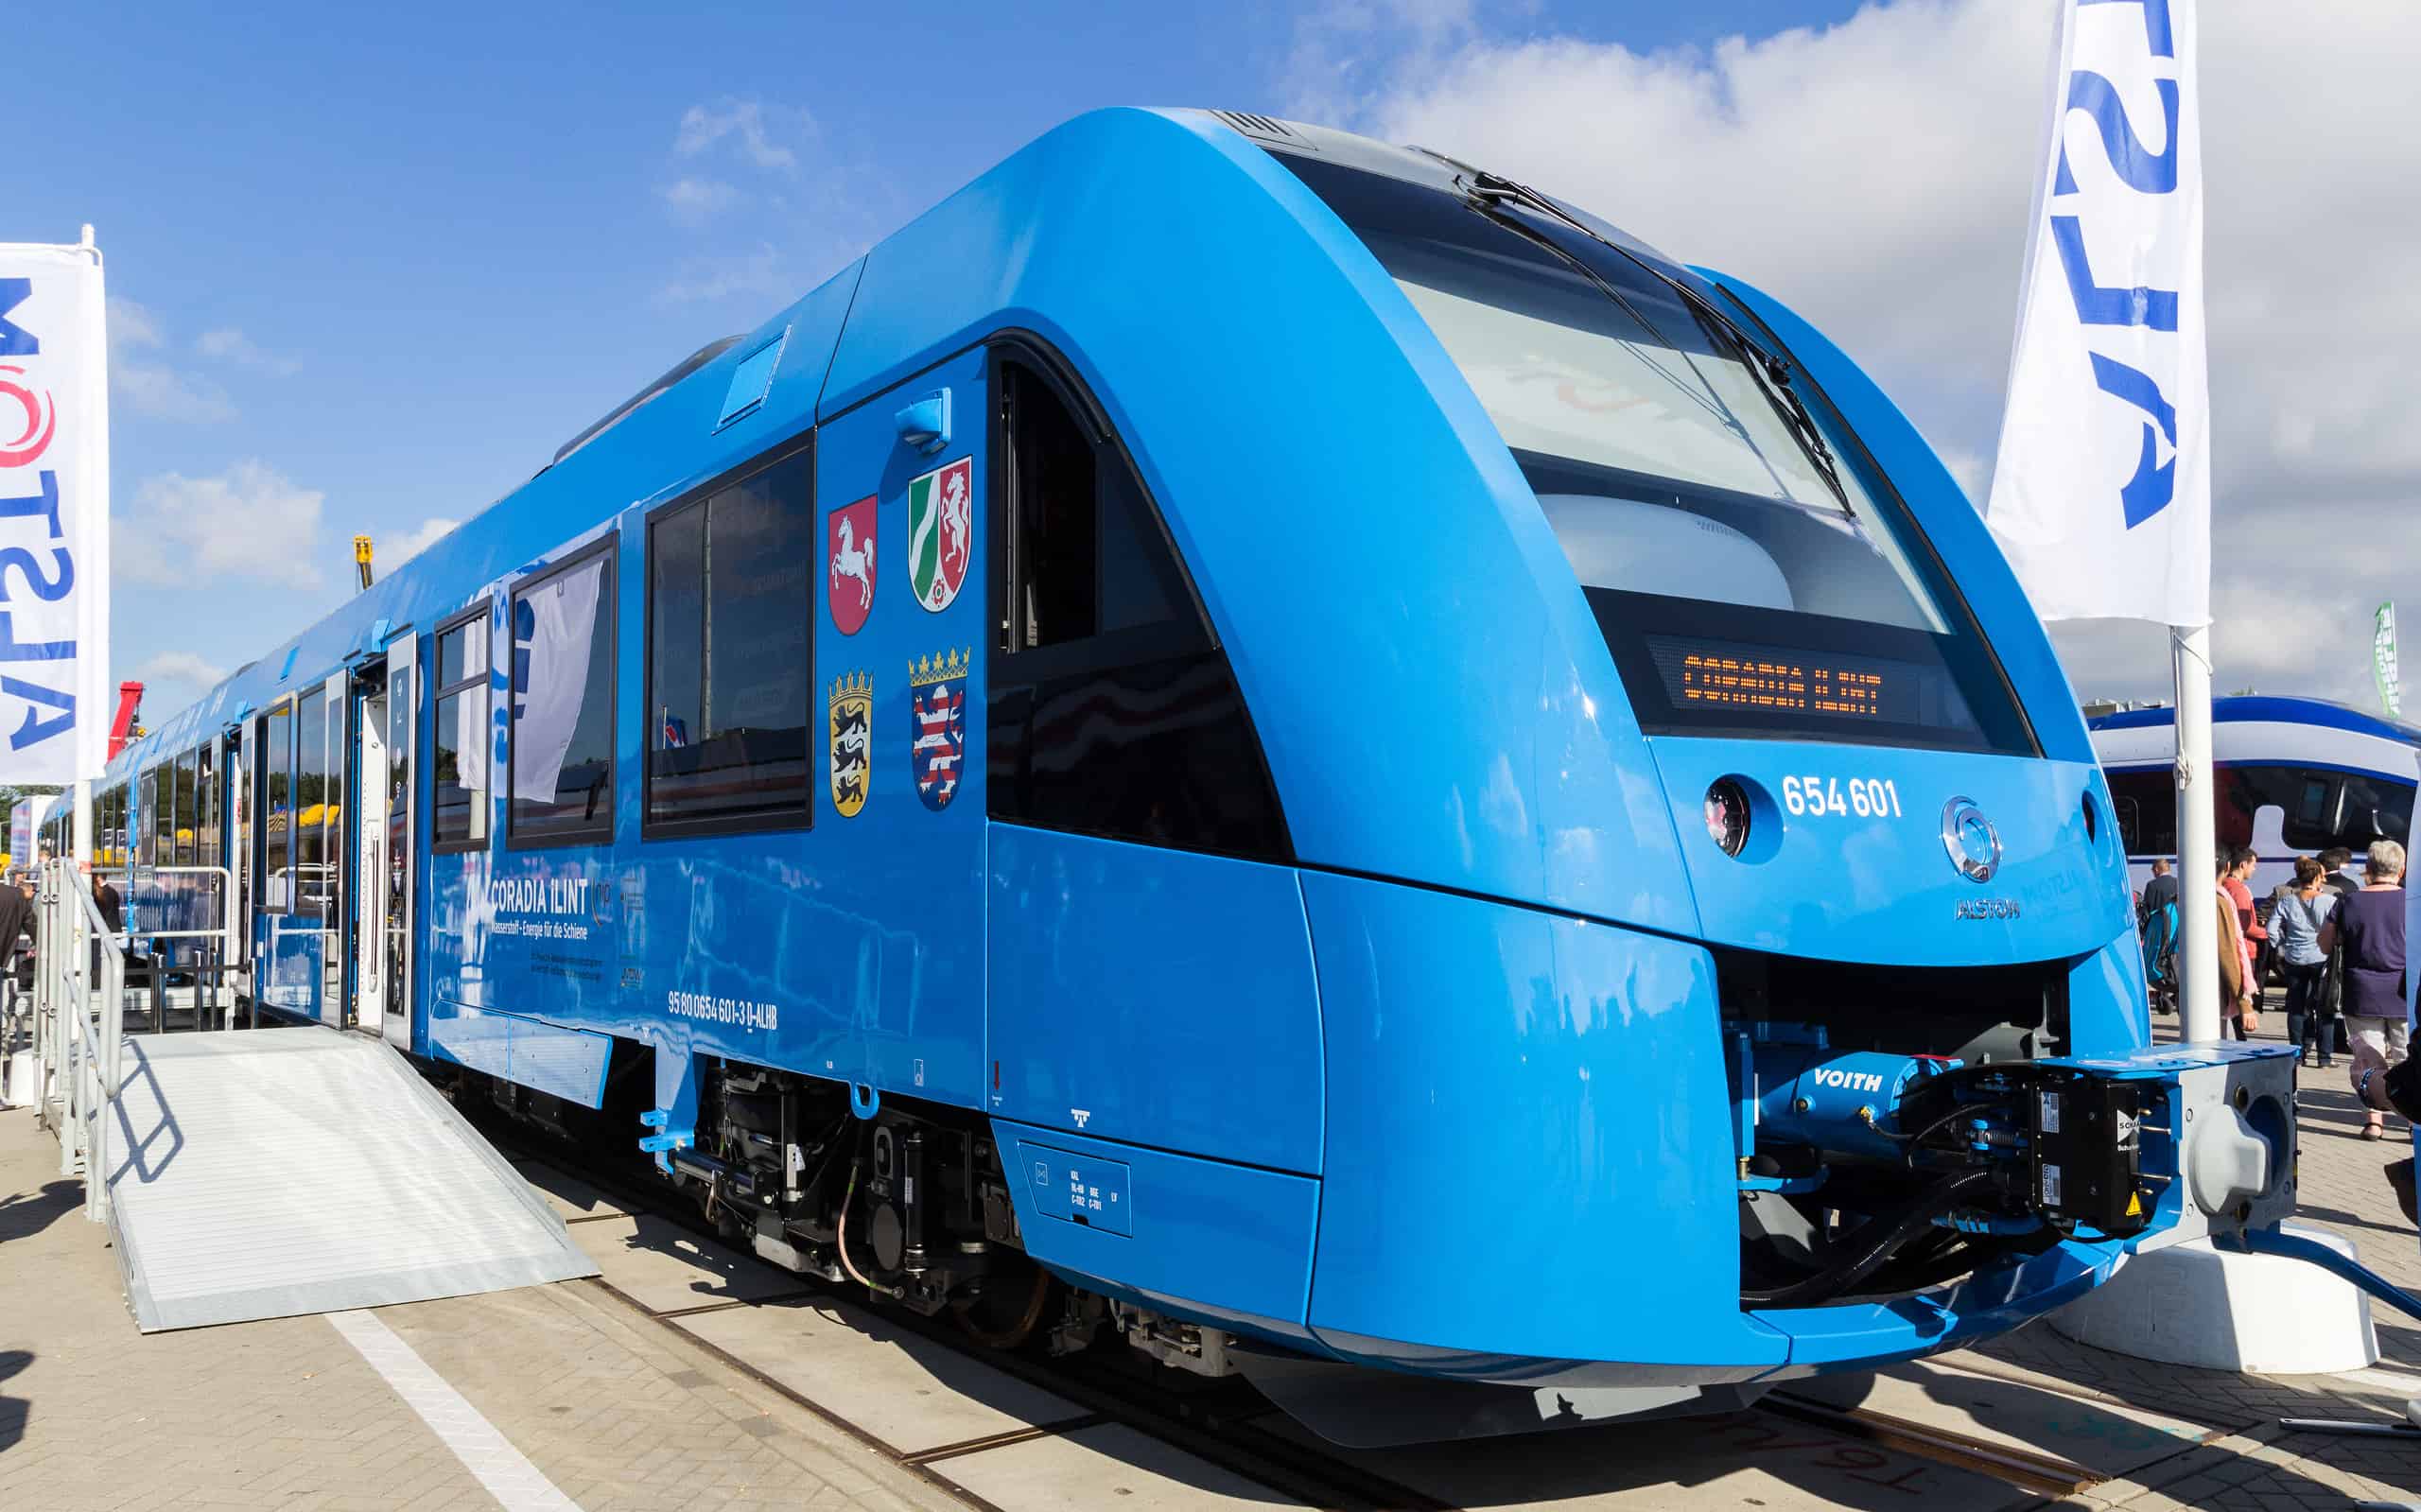 <p>The train's design works for non-electrified or partially electrified lines, and although it has the speed of an average combustion train, it does have a healthy range of 621 miles on a single hydrogen tank. In short, the train's fuel cell produces electrical power for traction, enabling clean and sustainable operation while ensuring high performance.</p>    <p>Don't worry: the Alstom Coradia iLint and safety go hand in hand, but how luxurious it is depends on the host country or specific route.</p><p>Sharks, lions, alligators, and more! Don’t miss today’s latest and most exciting animal news. <strong><a href="https://www.msn.com/en-us/channel/source/AZ%20Animals%20US/sr-vid-7etr9q8xun6k6508c3nufaum0de3dqktiq6h27ddeagnfug30wka">Click here to access the A-Z Animals profile page</a> and be sure to hit the <em>Follow</em> button here or at the top of this article!</strong></p> <p>Have feedback? Add a comment below!</p>